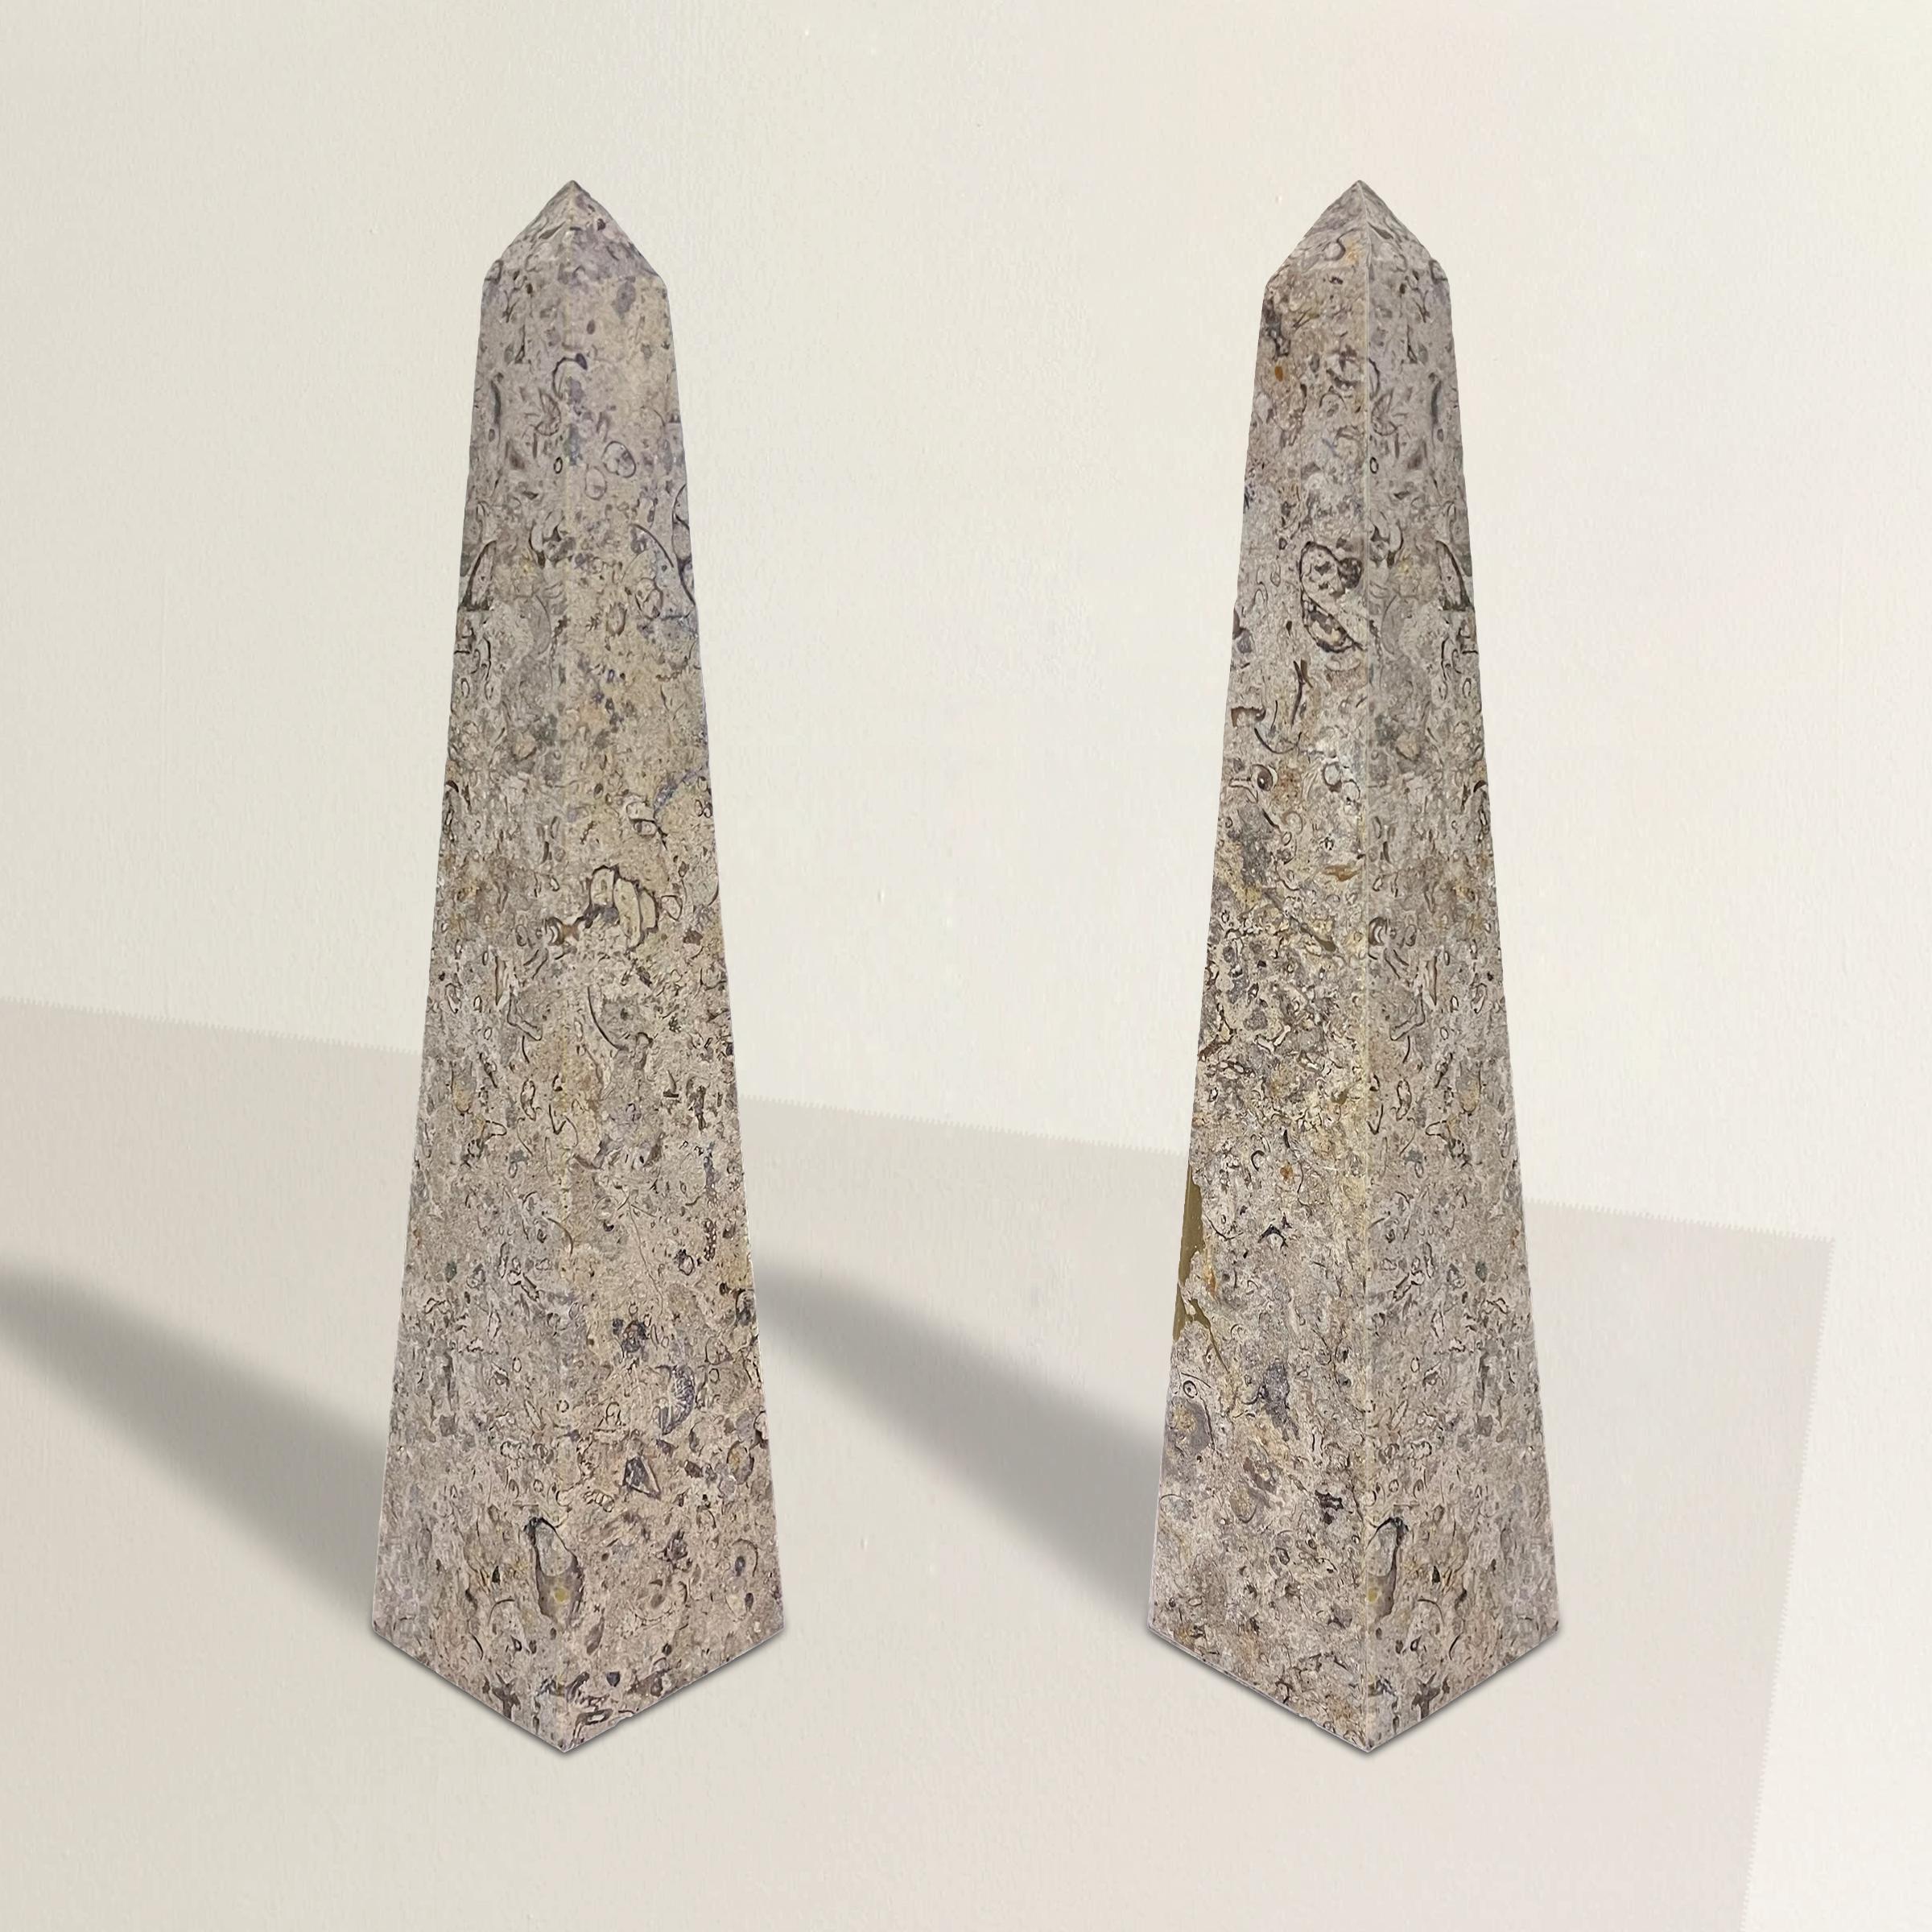 This pair of marble obelisks stands as elegant tributes to the enduring allure of ancient art. Drawing inspiration from the monumental obelisks of ancient Egypt and Rome, these exquisite pieces pay homage to a rich history. The obelisk, a symbol of